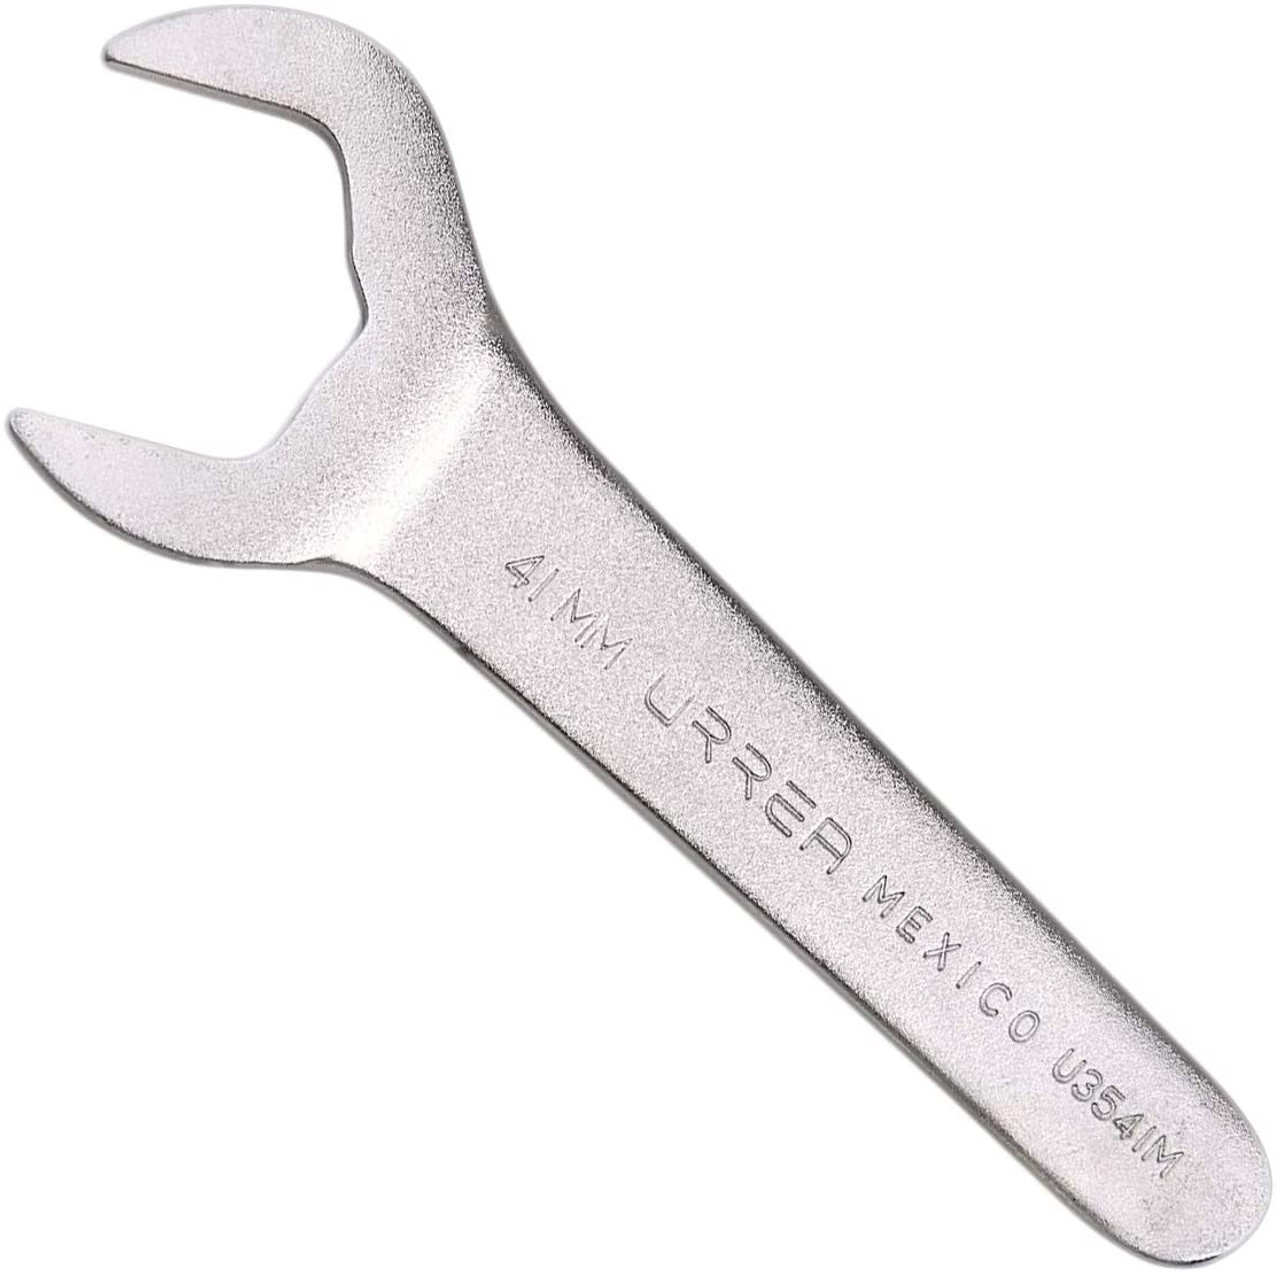 Satin Finish Service wrench, Size: 13/16, Total Length: 6-5/8"